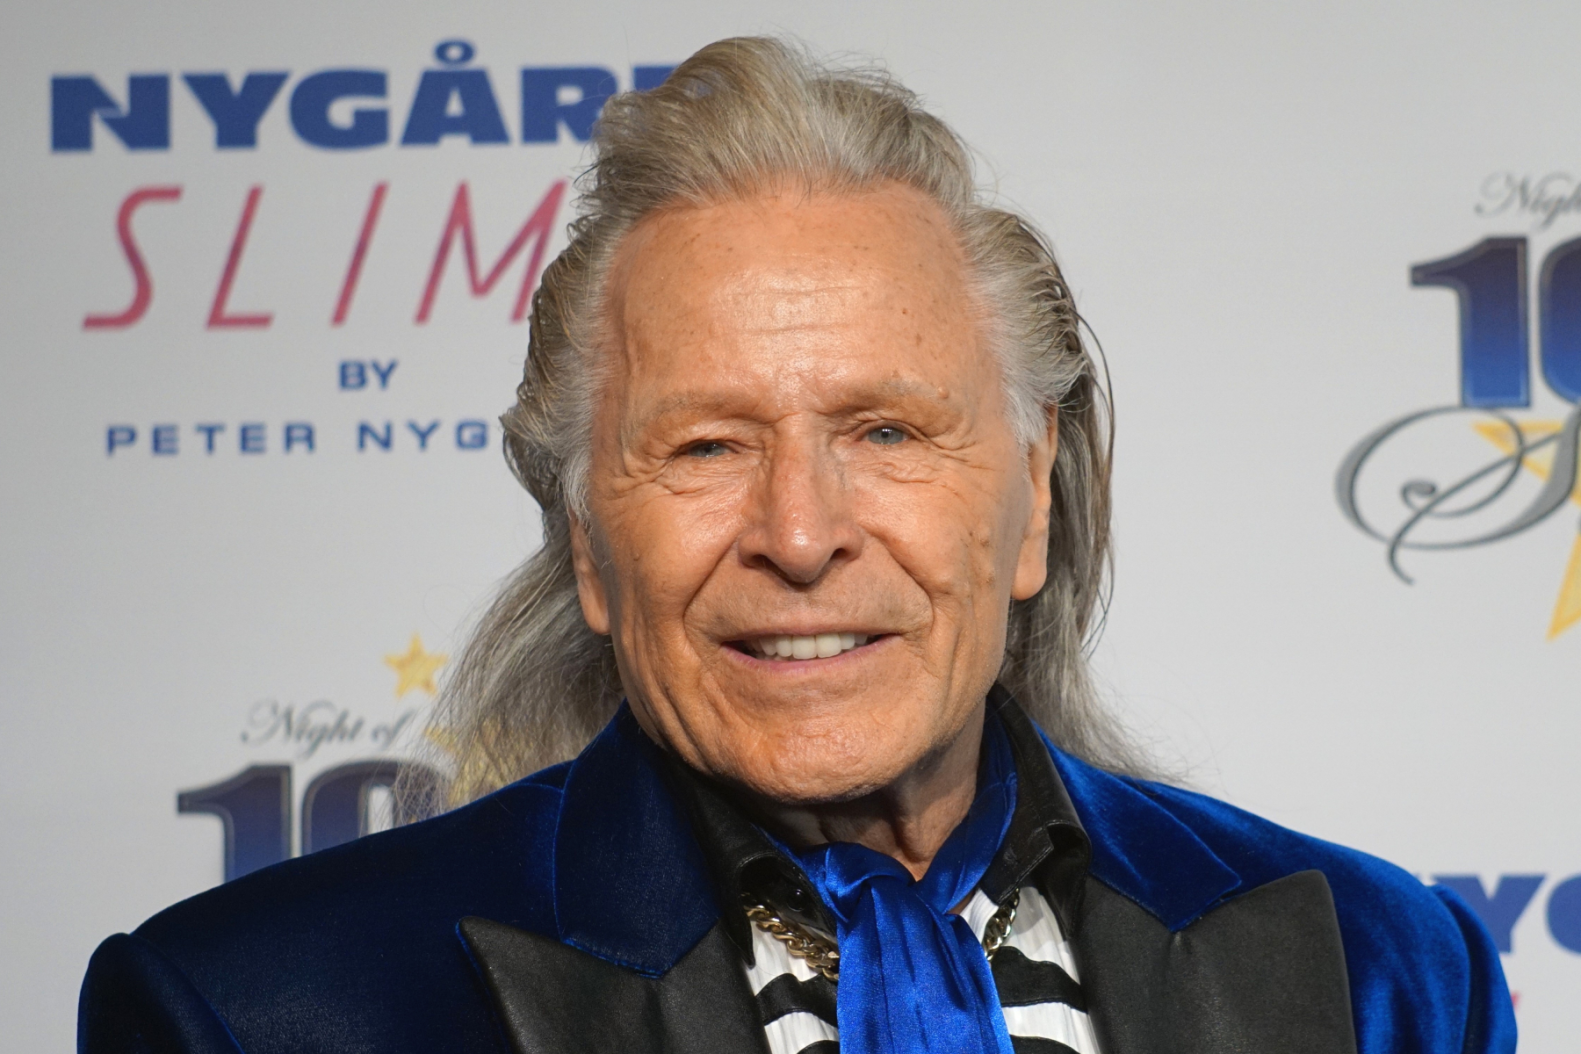 Peter Nygard: From Fashion Mogul to Convicted Criminal